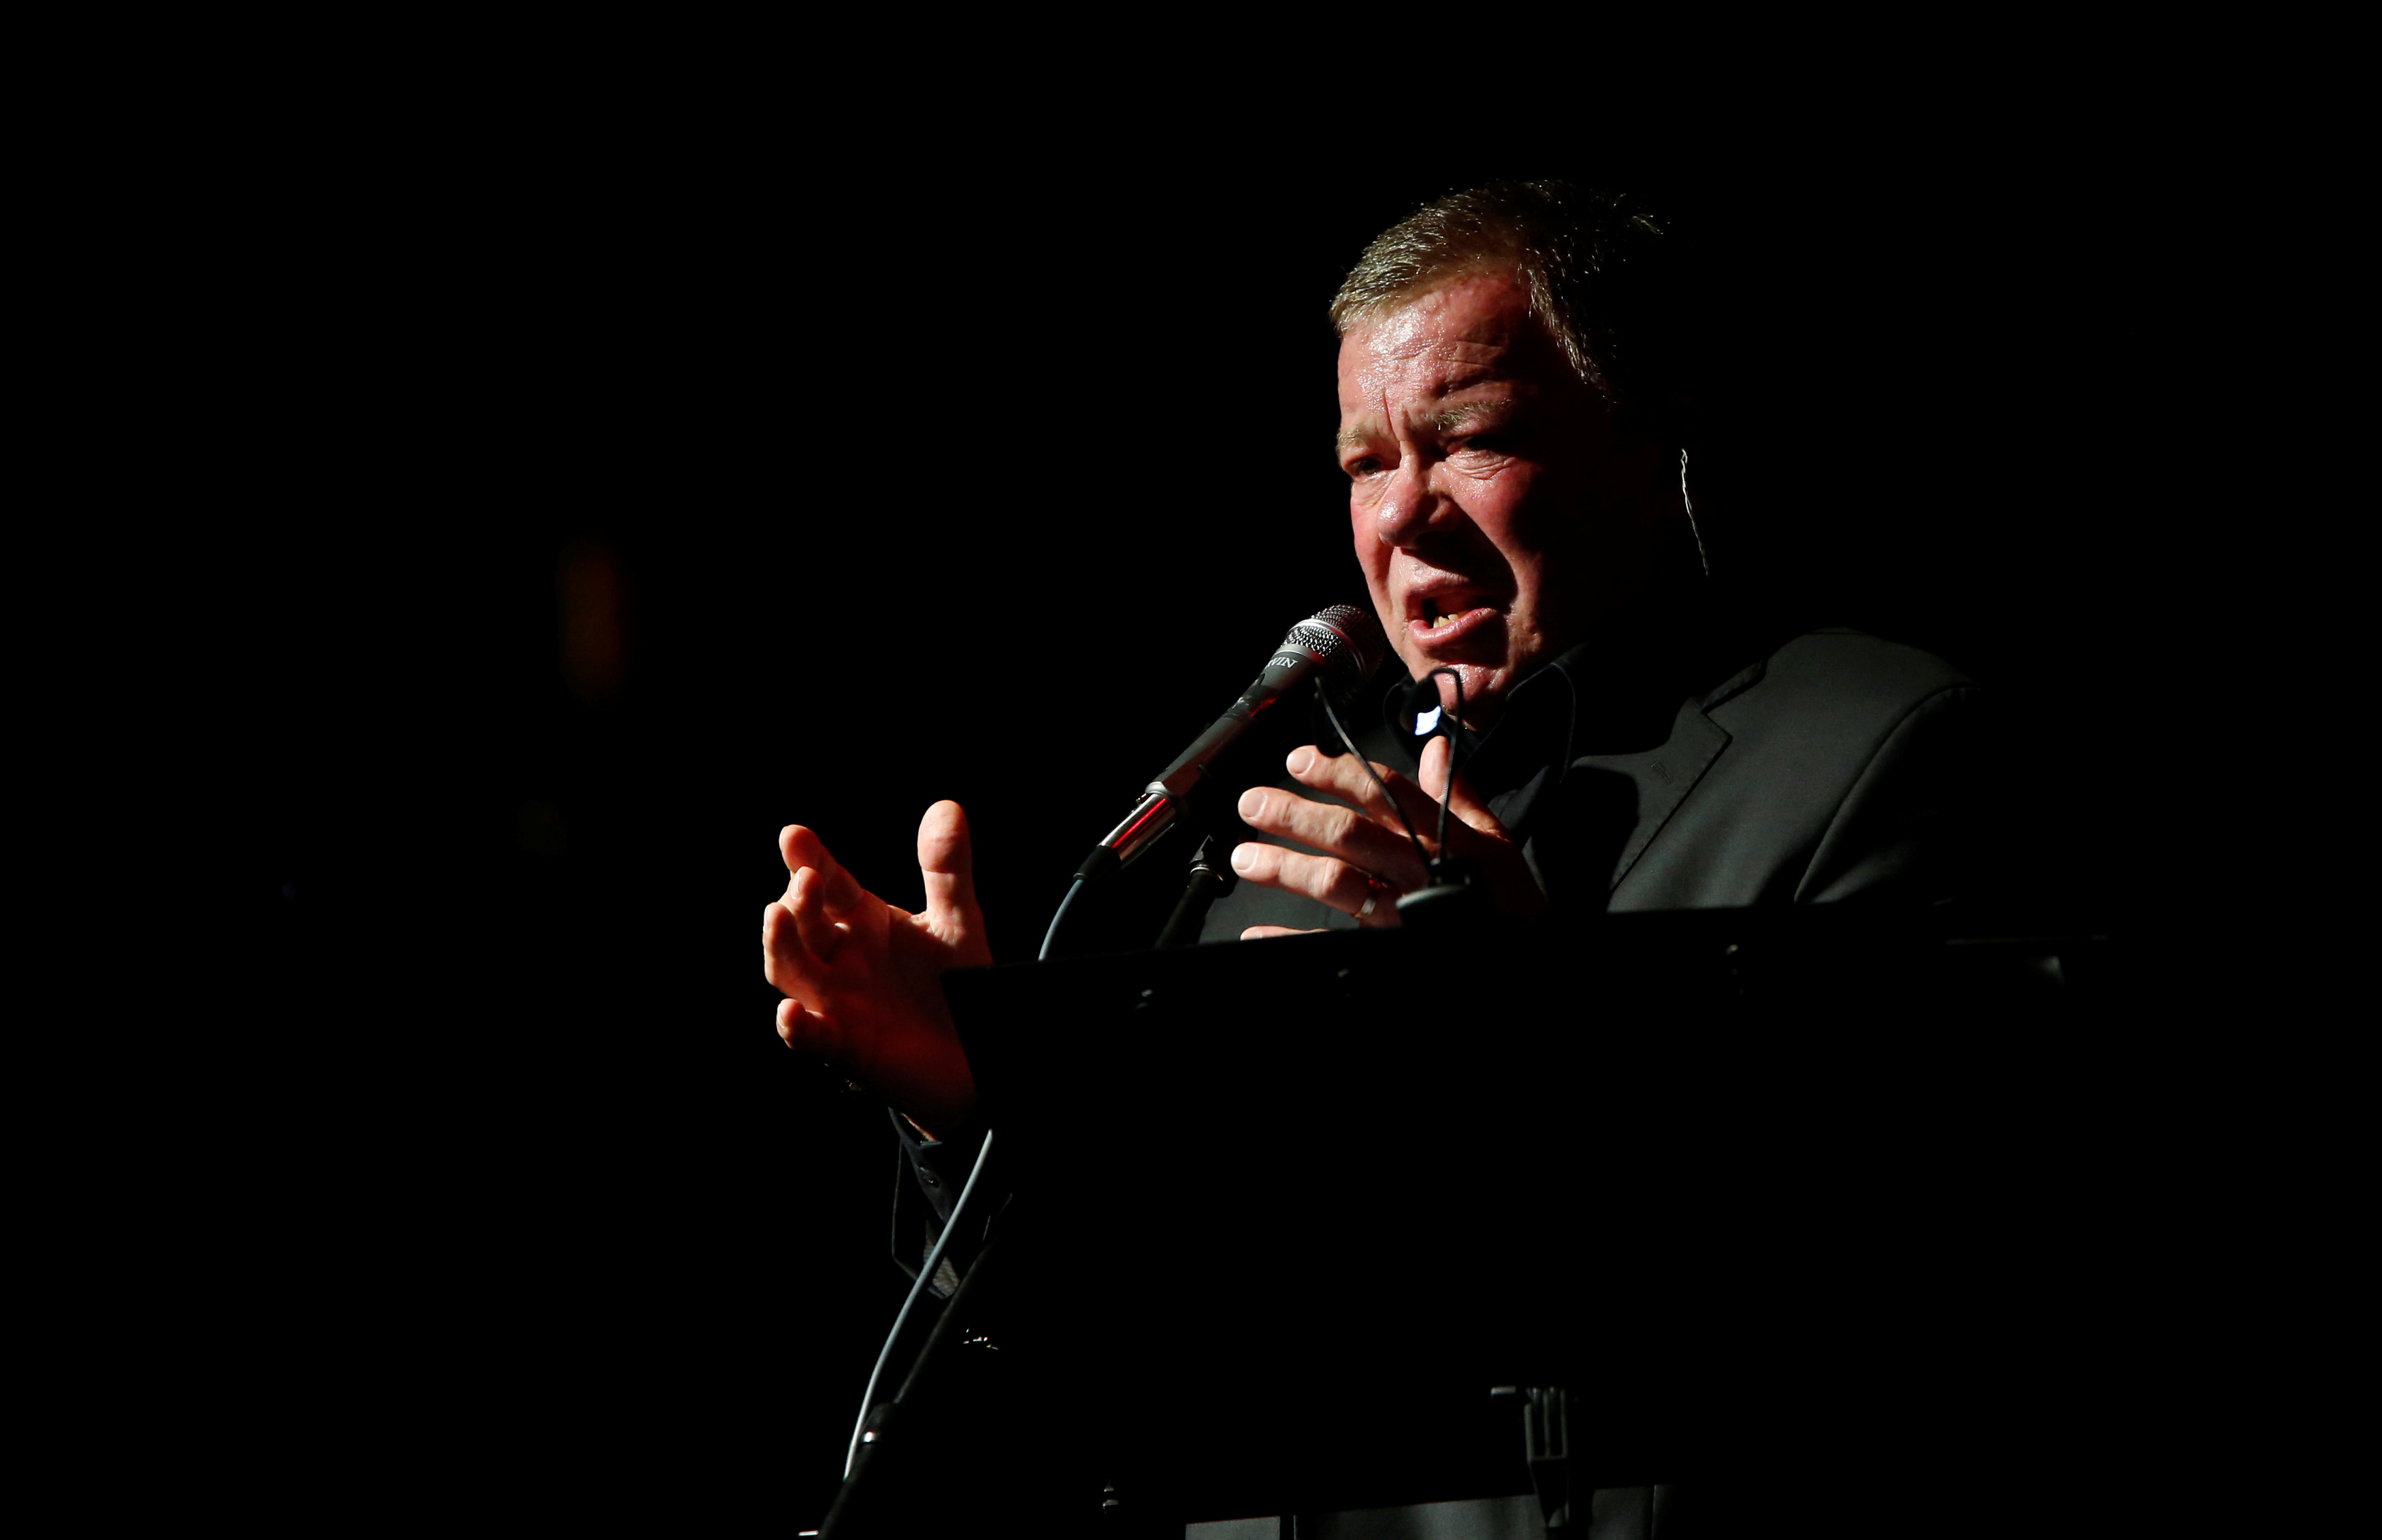 Actor Shatner performs at The Canyon Club in Agoura